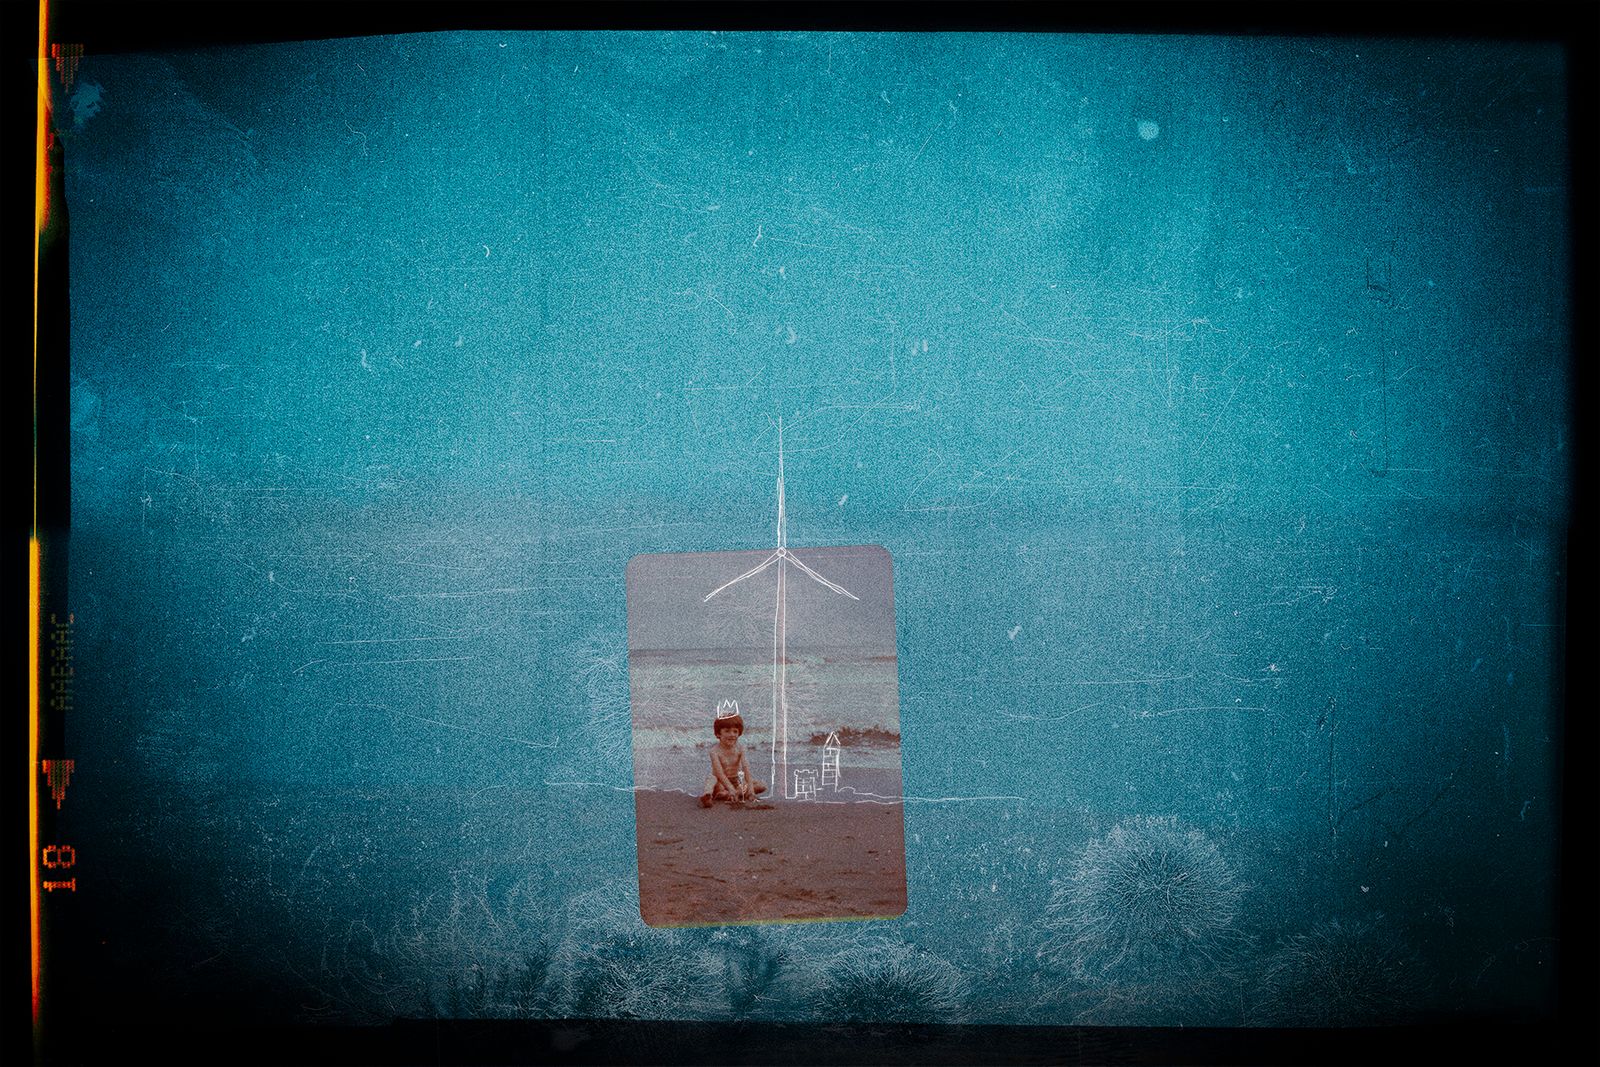 © Tirdad Aghakhani - Image from the BETWEEN TIME AND SPACE photography project